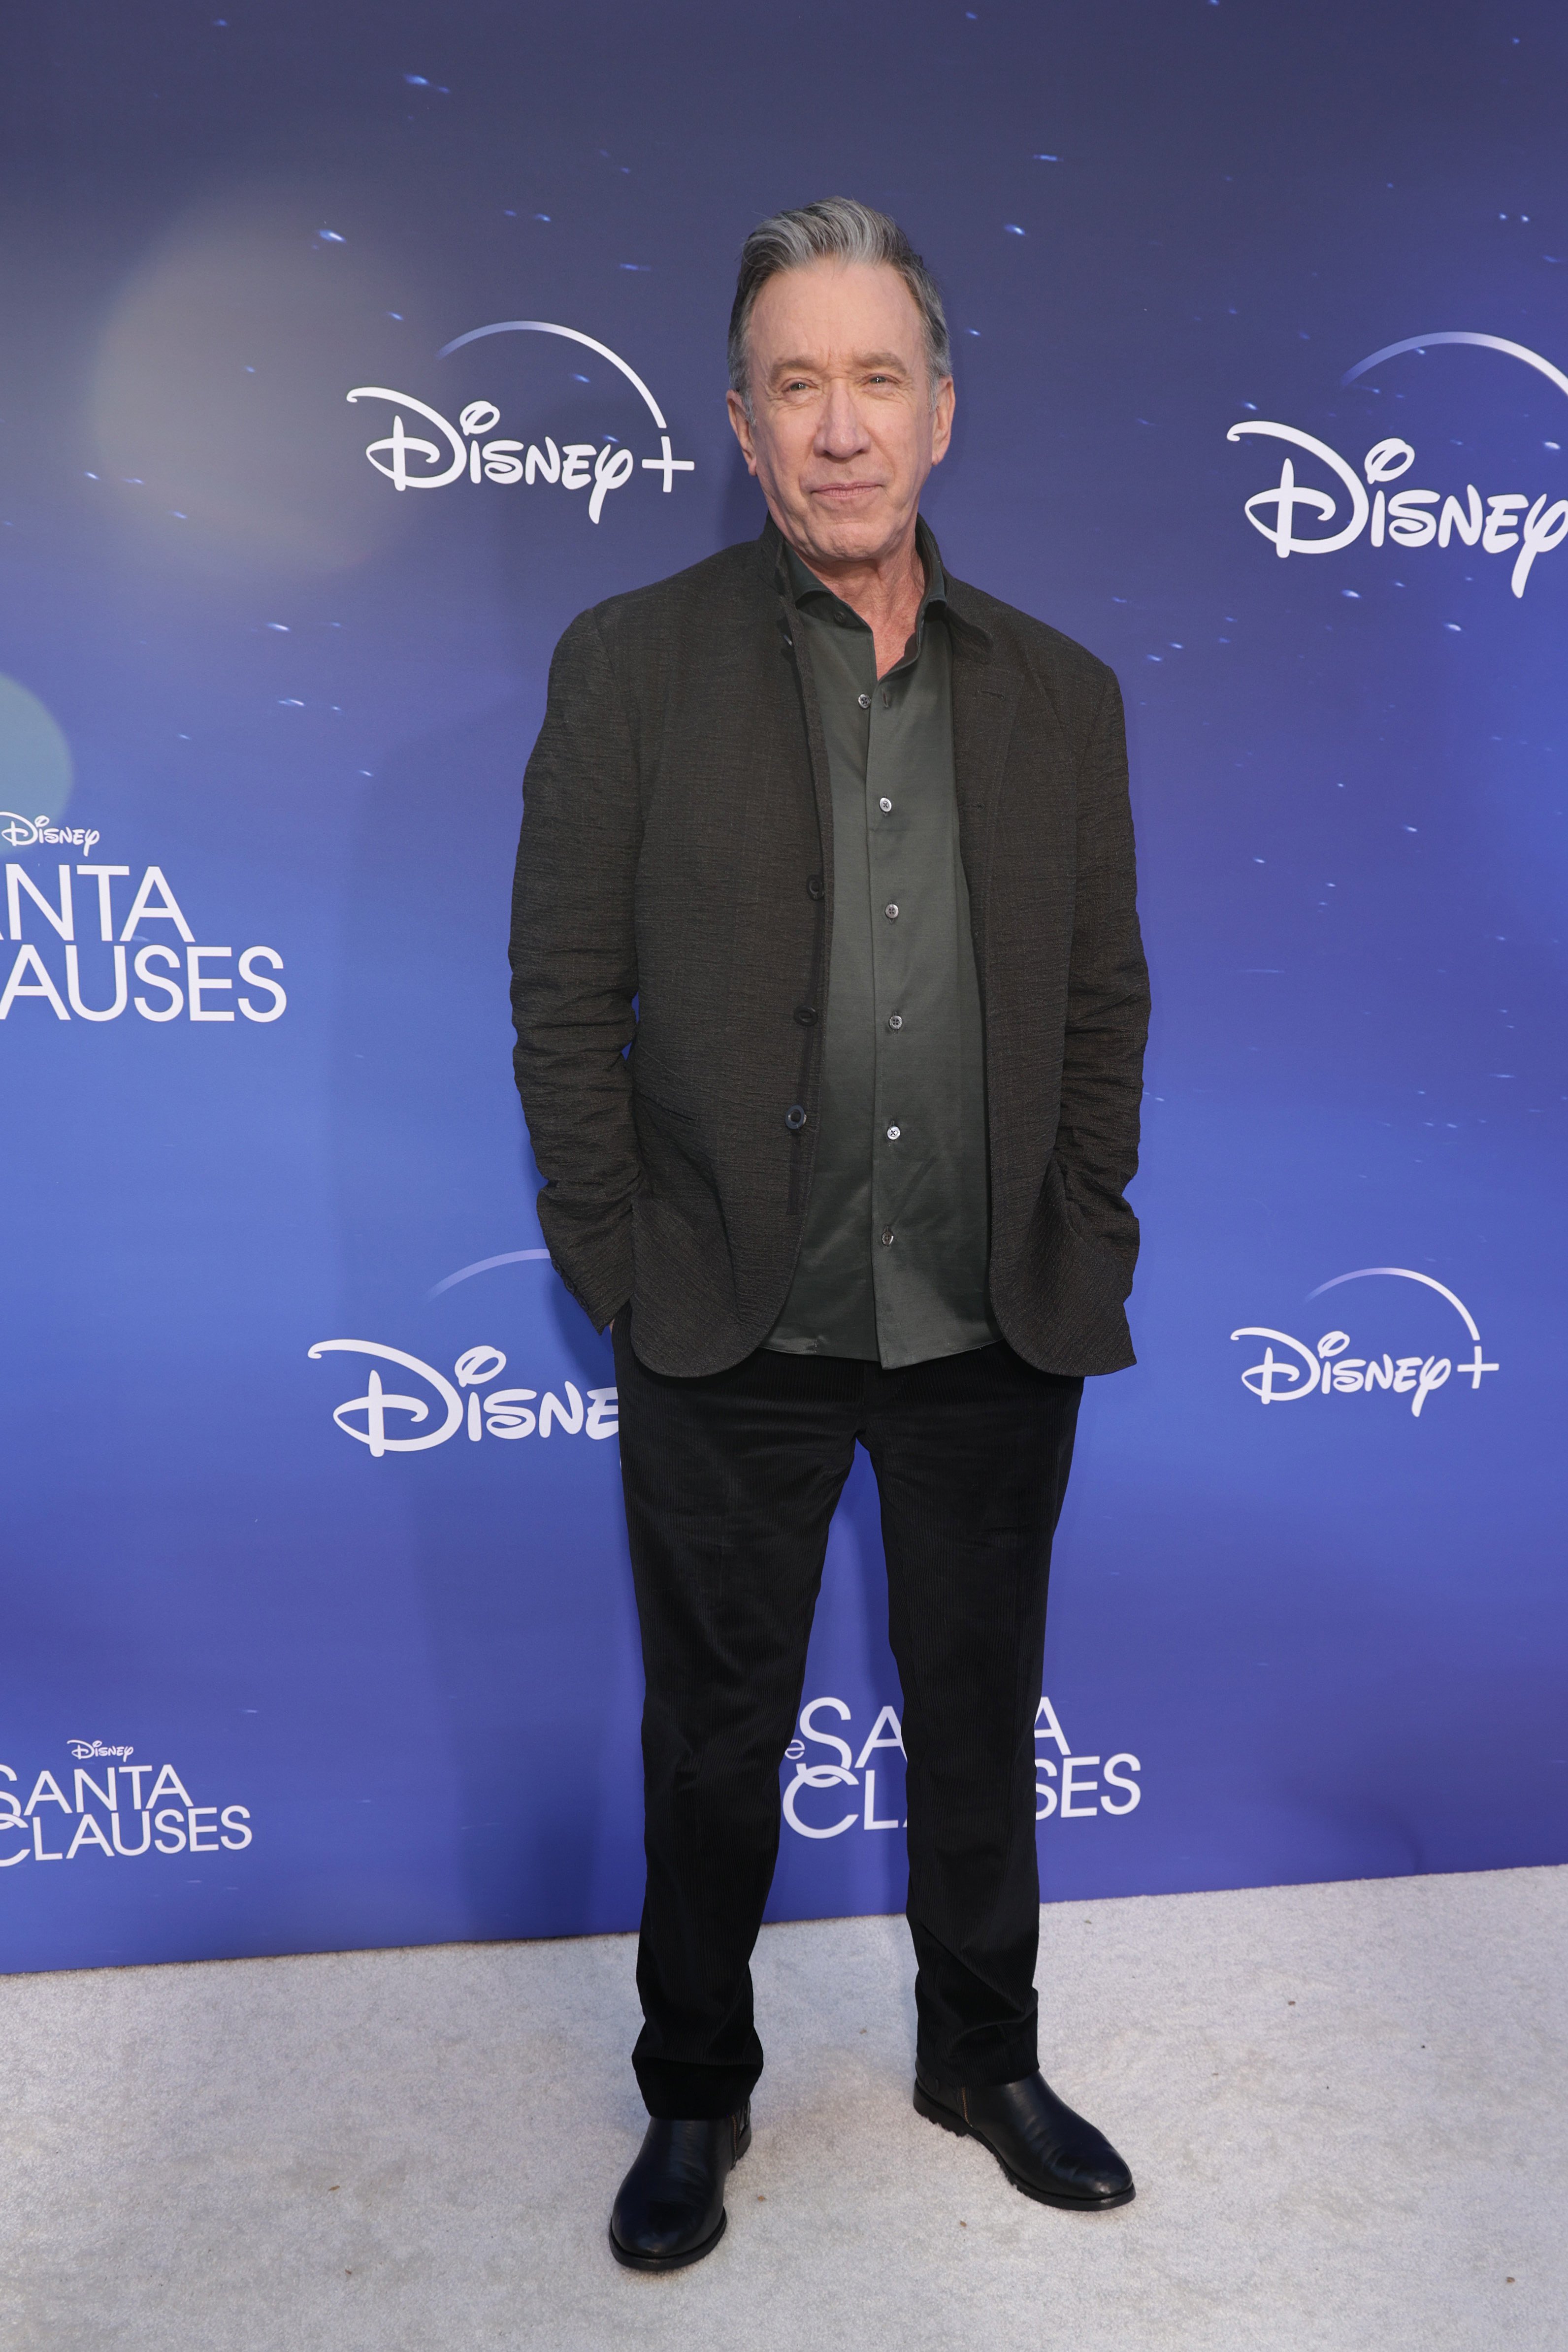 Tim Allen at the premiere of "The Santa Clauses" on November 06, 2022 in California | Source: Getty Images